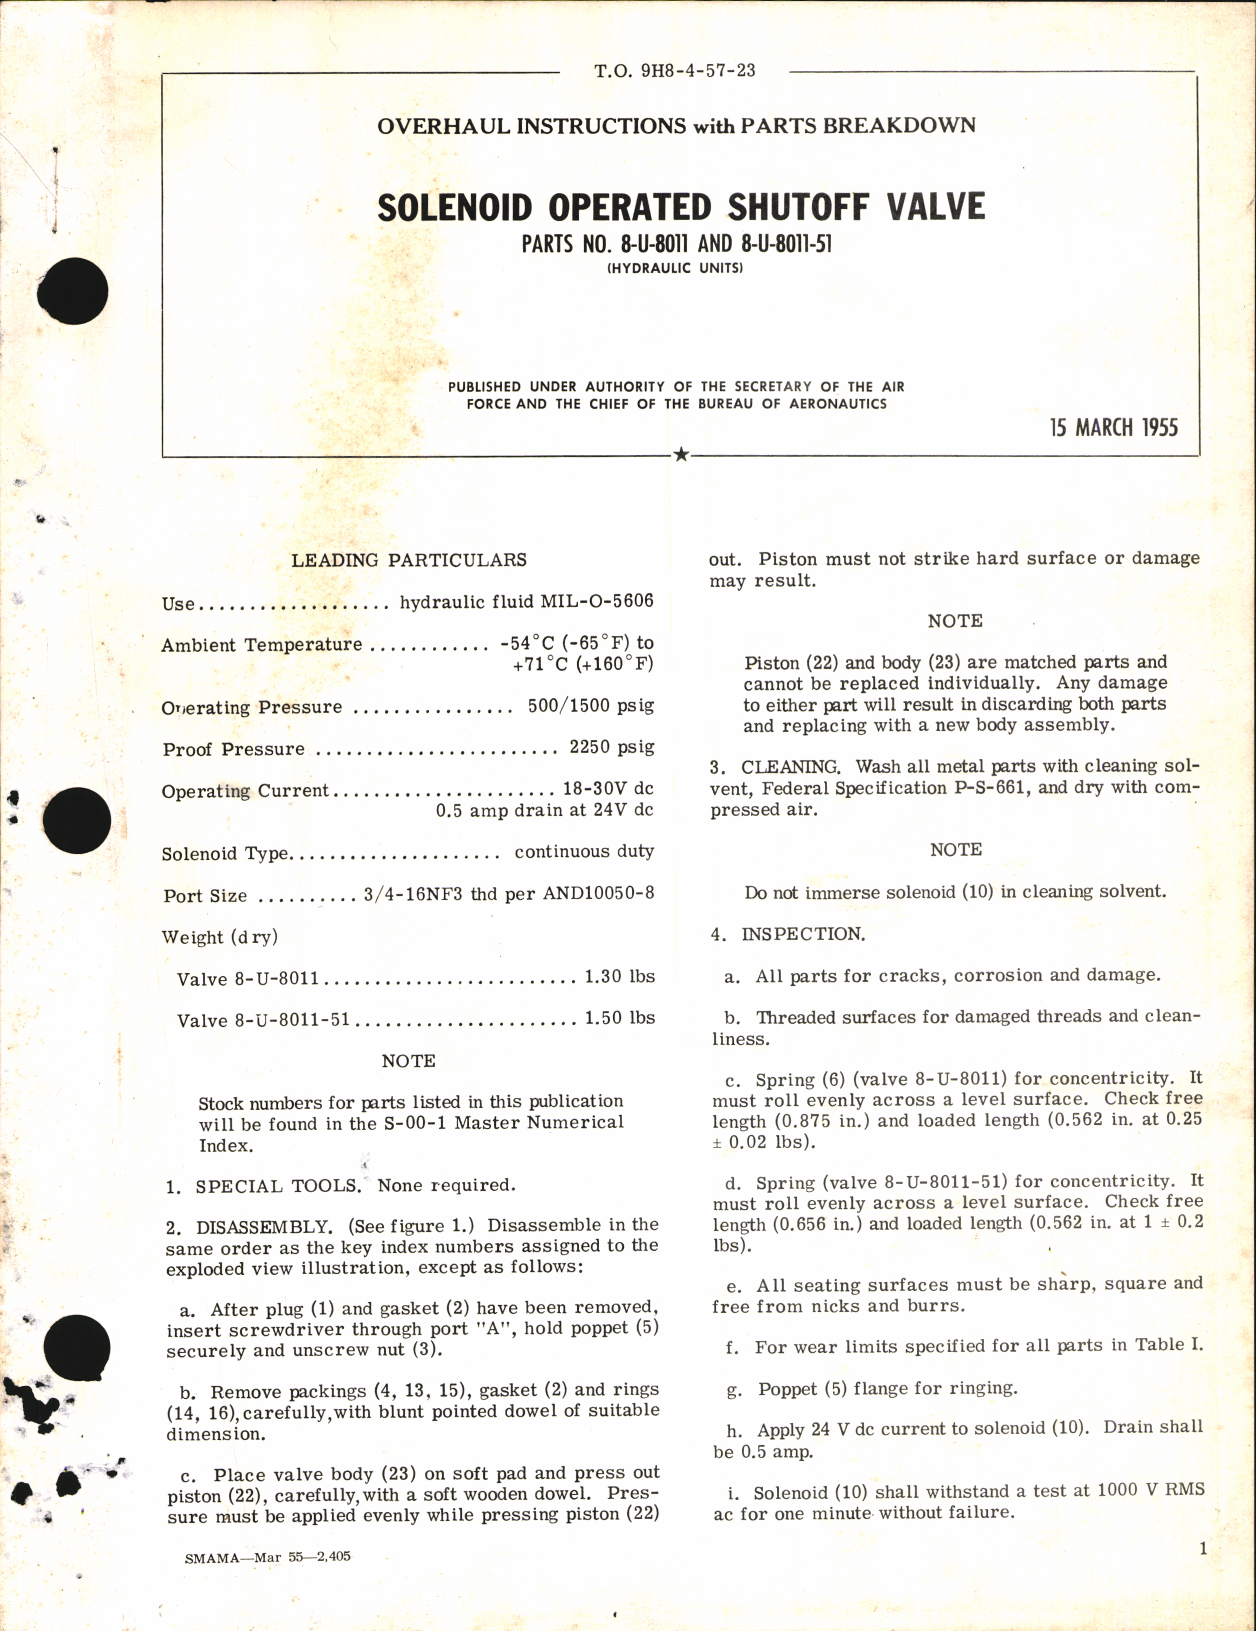 Sample page 1 from AirCorps Library document: Overhaul Instructions with Parts Breakdown for Solenoid Operated Shutoff Valve